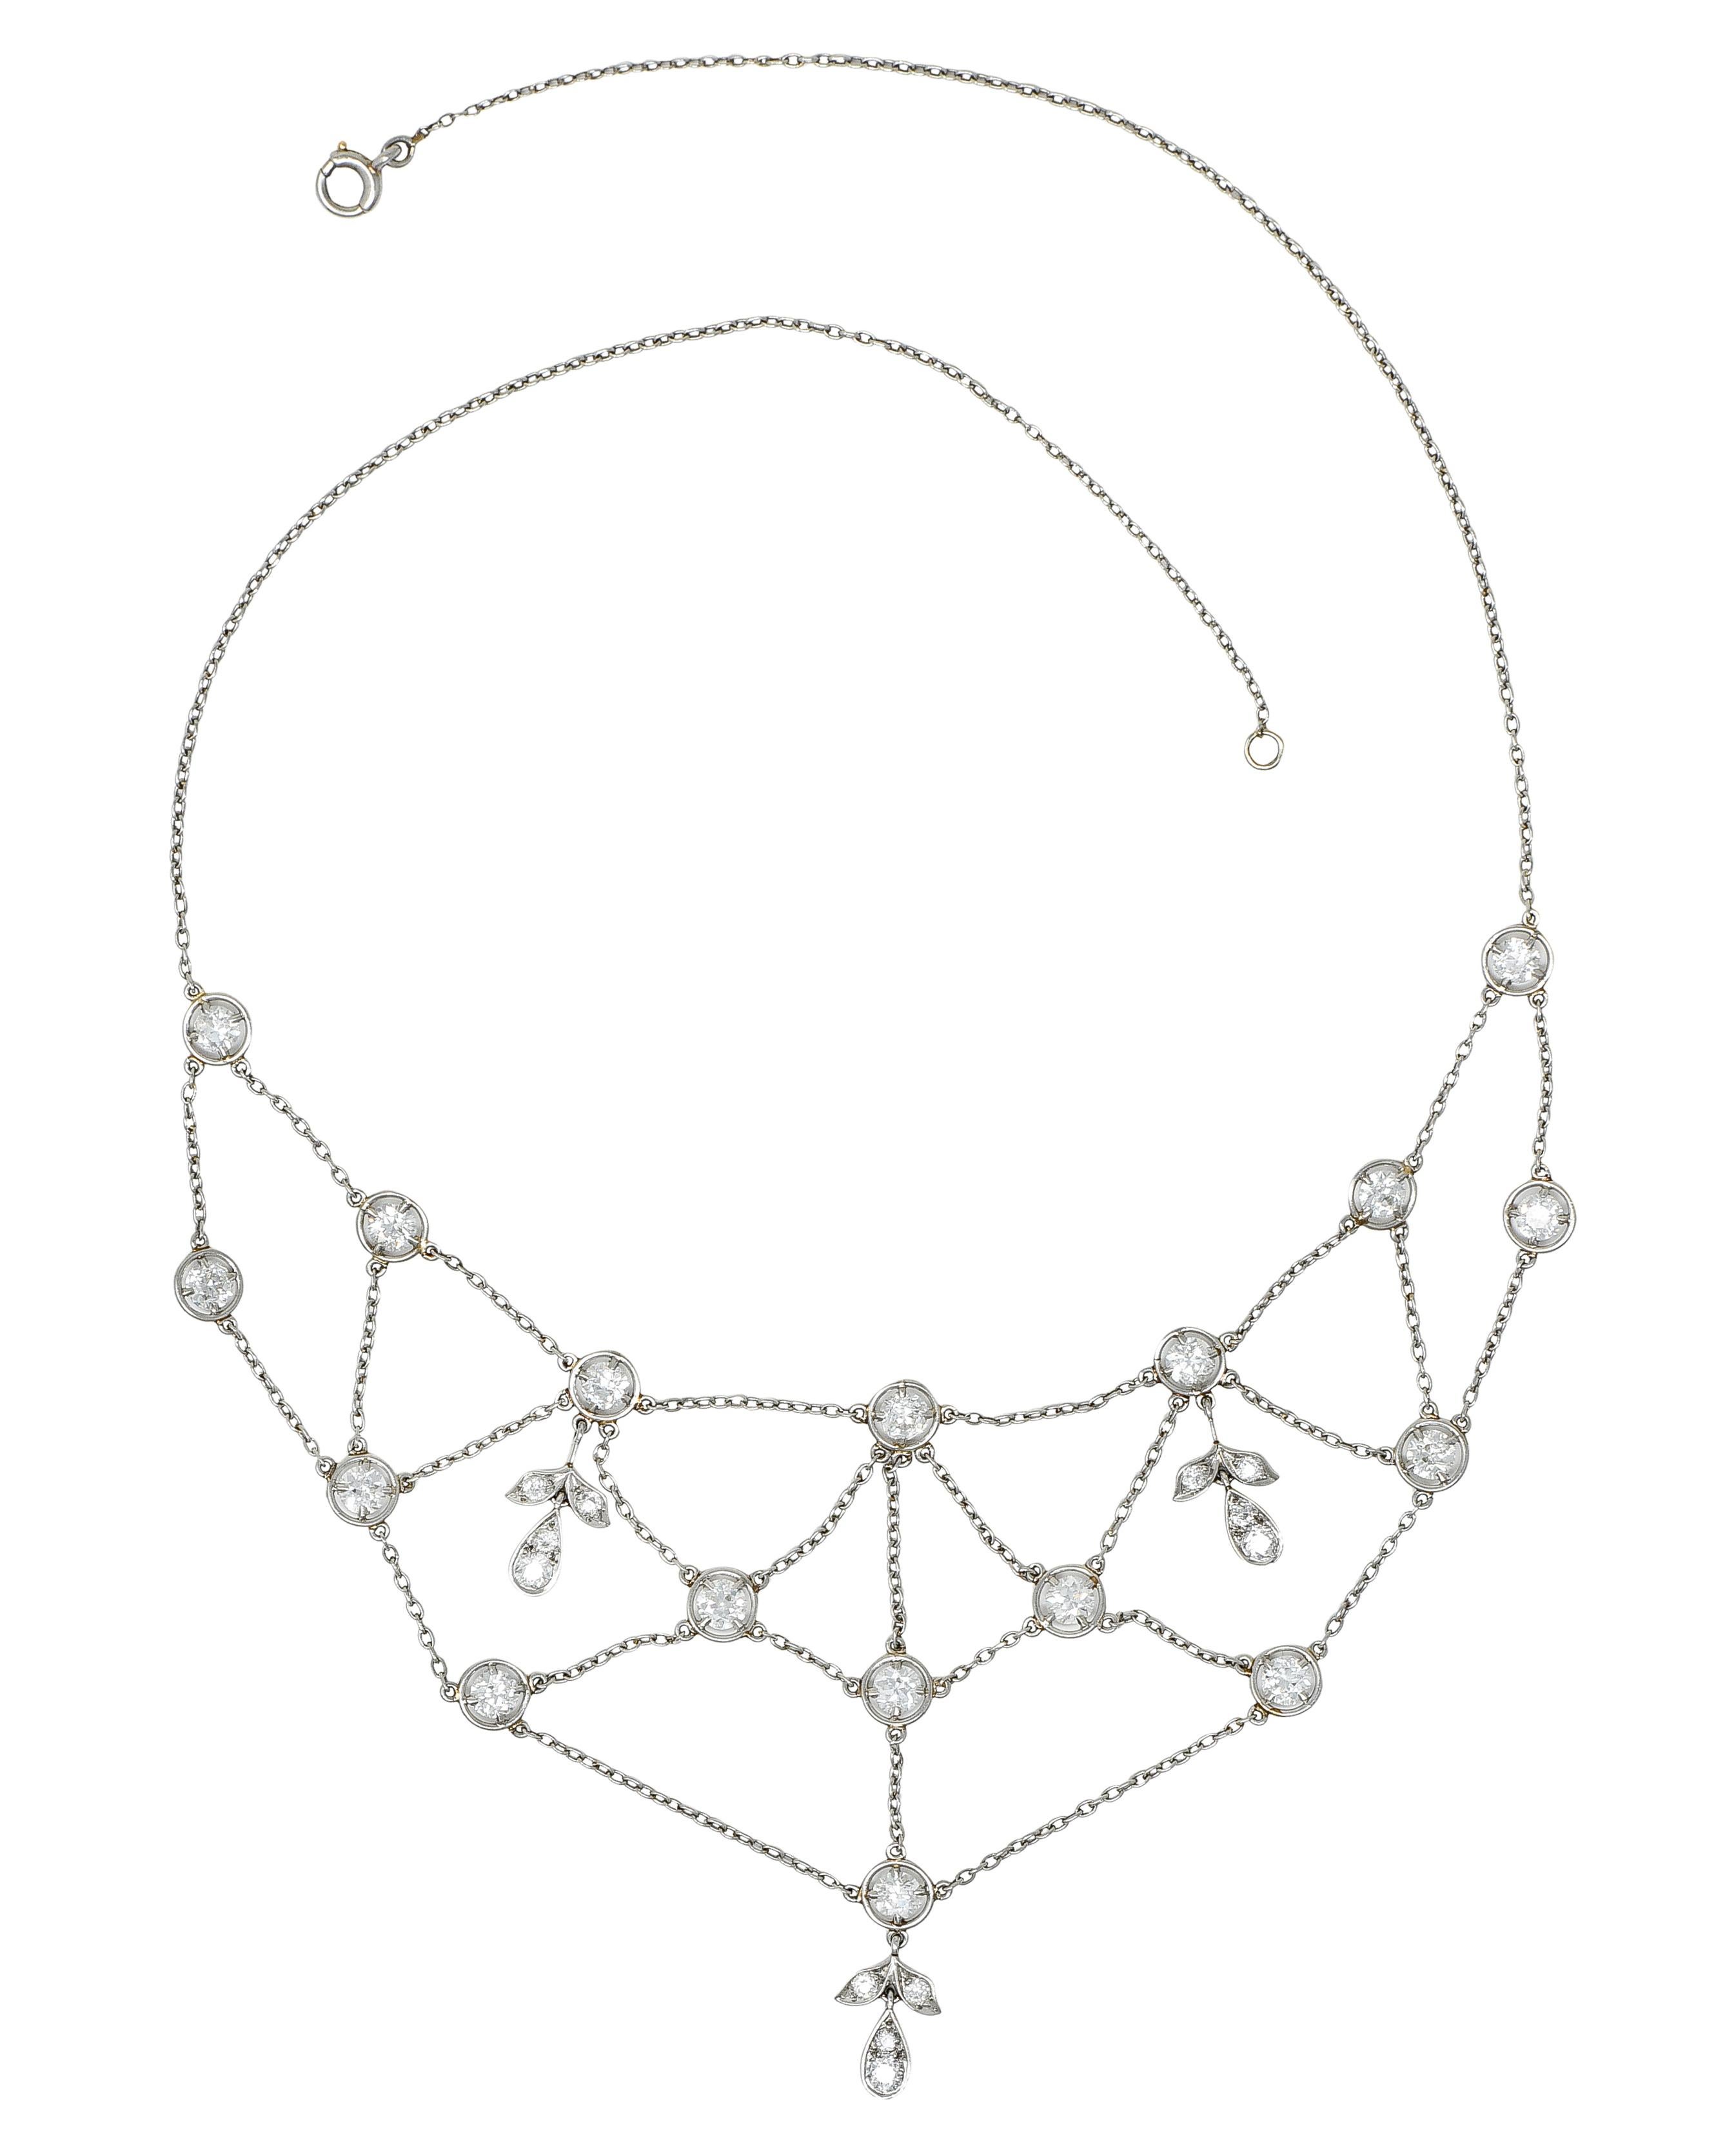 Necklace is designed with circular diamond stations connected by swagged cable chain

Accented by three articulated foliate drops

Set with old European and transitional cut diamonds

Weighing in total approximately 3.40 carats - G to H color with